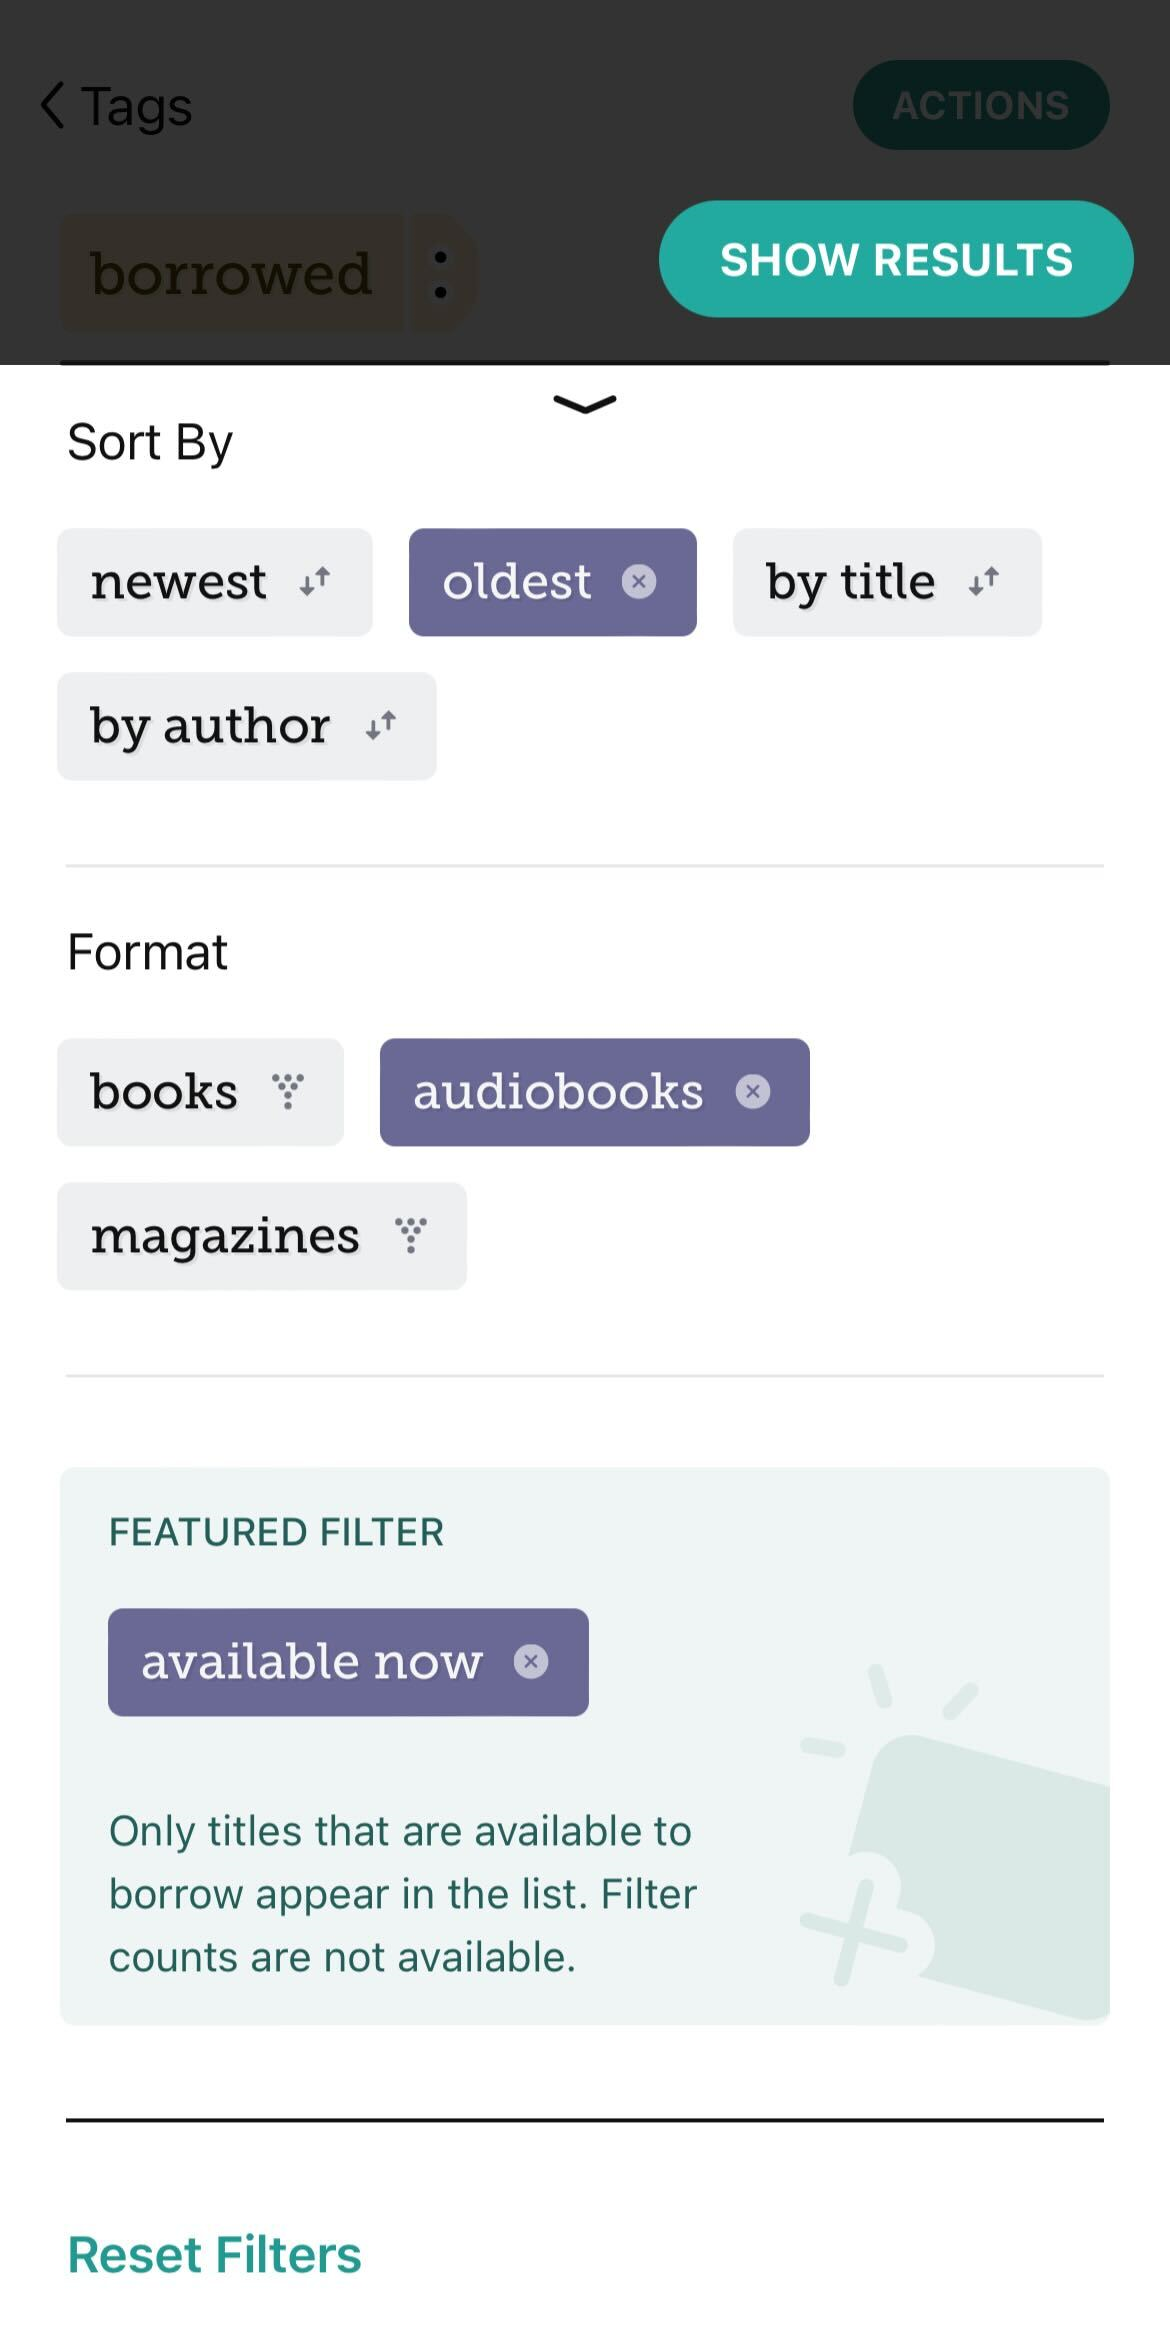 tags filter menu with "oldest," "audiobooks," and "available now" filters enabled